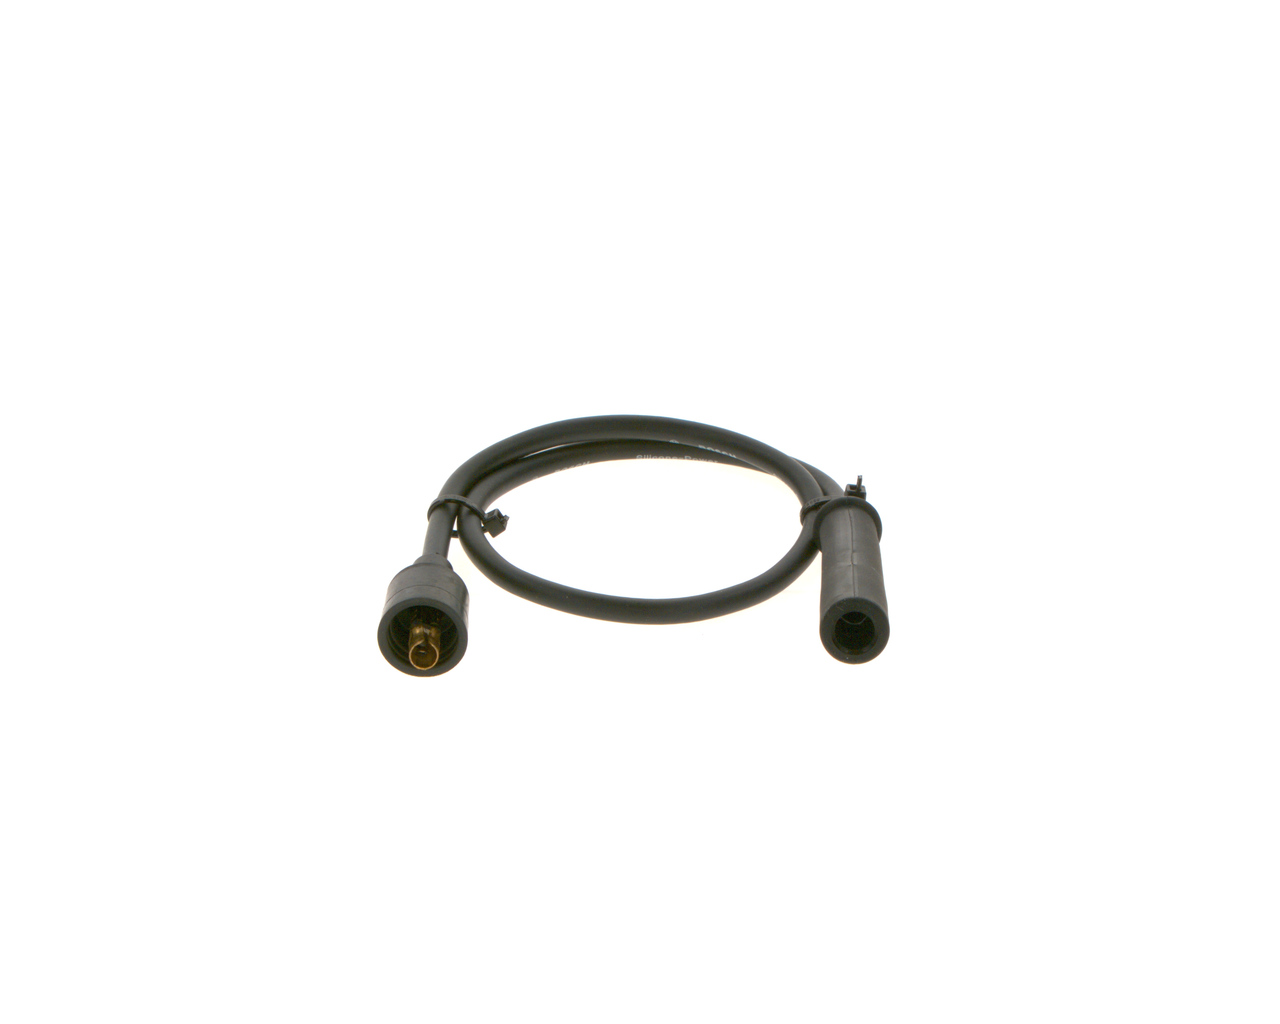 0986356716, Ignition Cable Kit, BOSCH, 300/989, 4021, B716, DKB253, RC-FX31, ZEF906, 0300890906, 7238, RBSS44